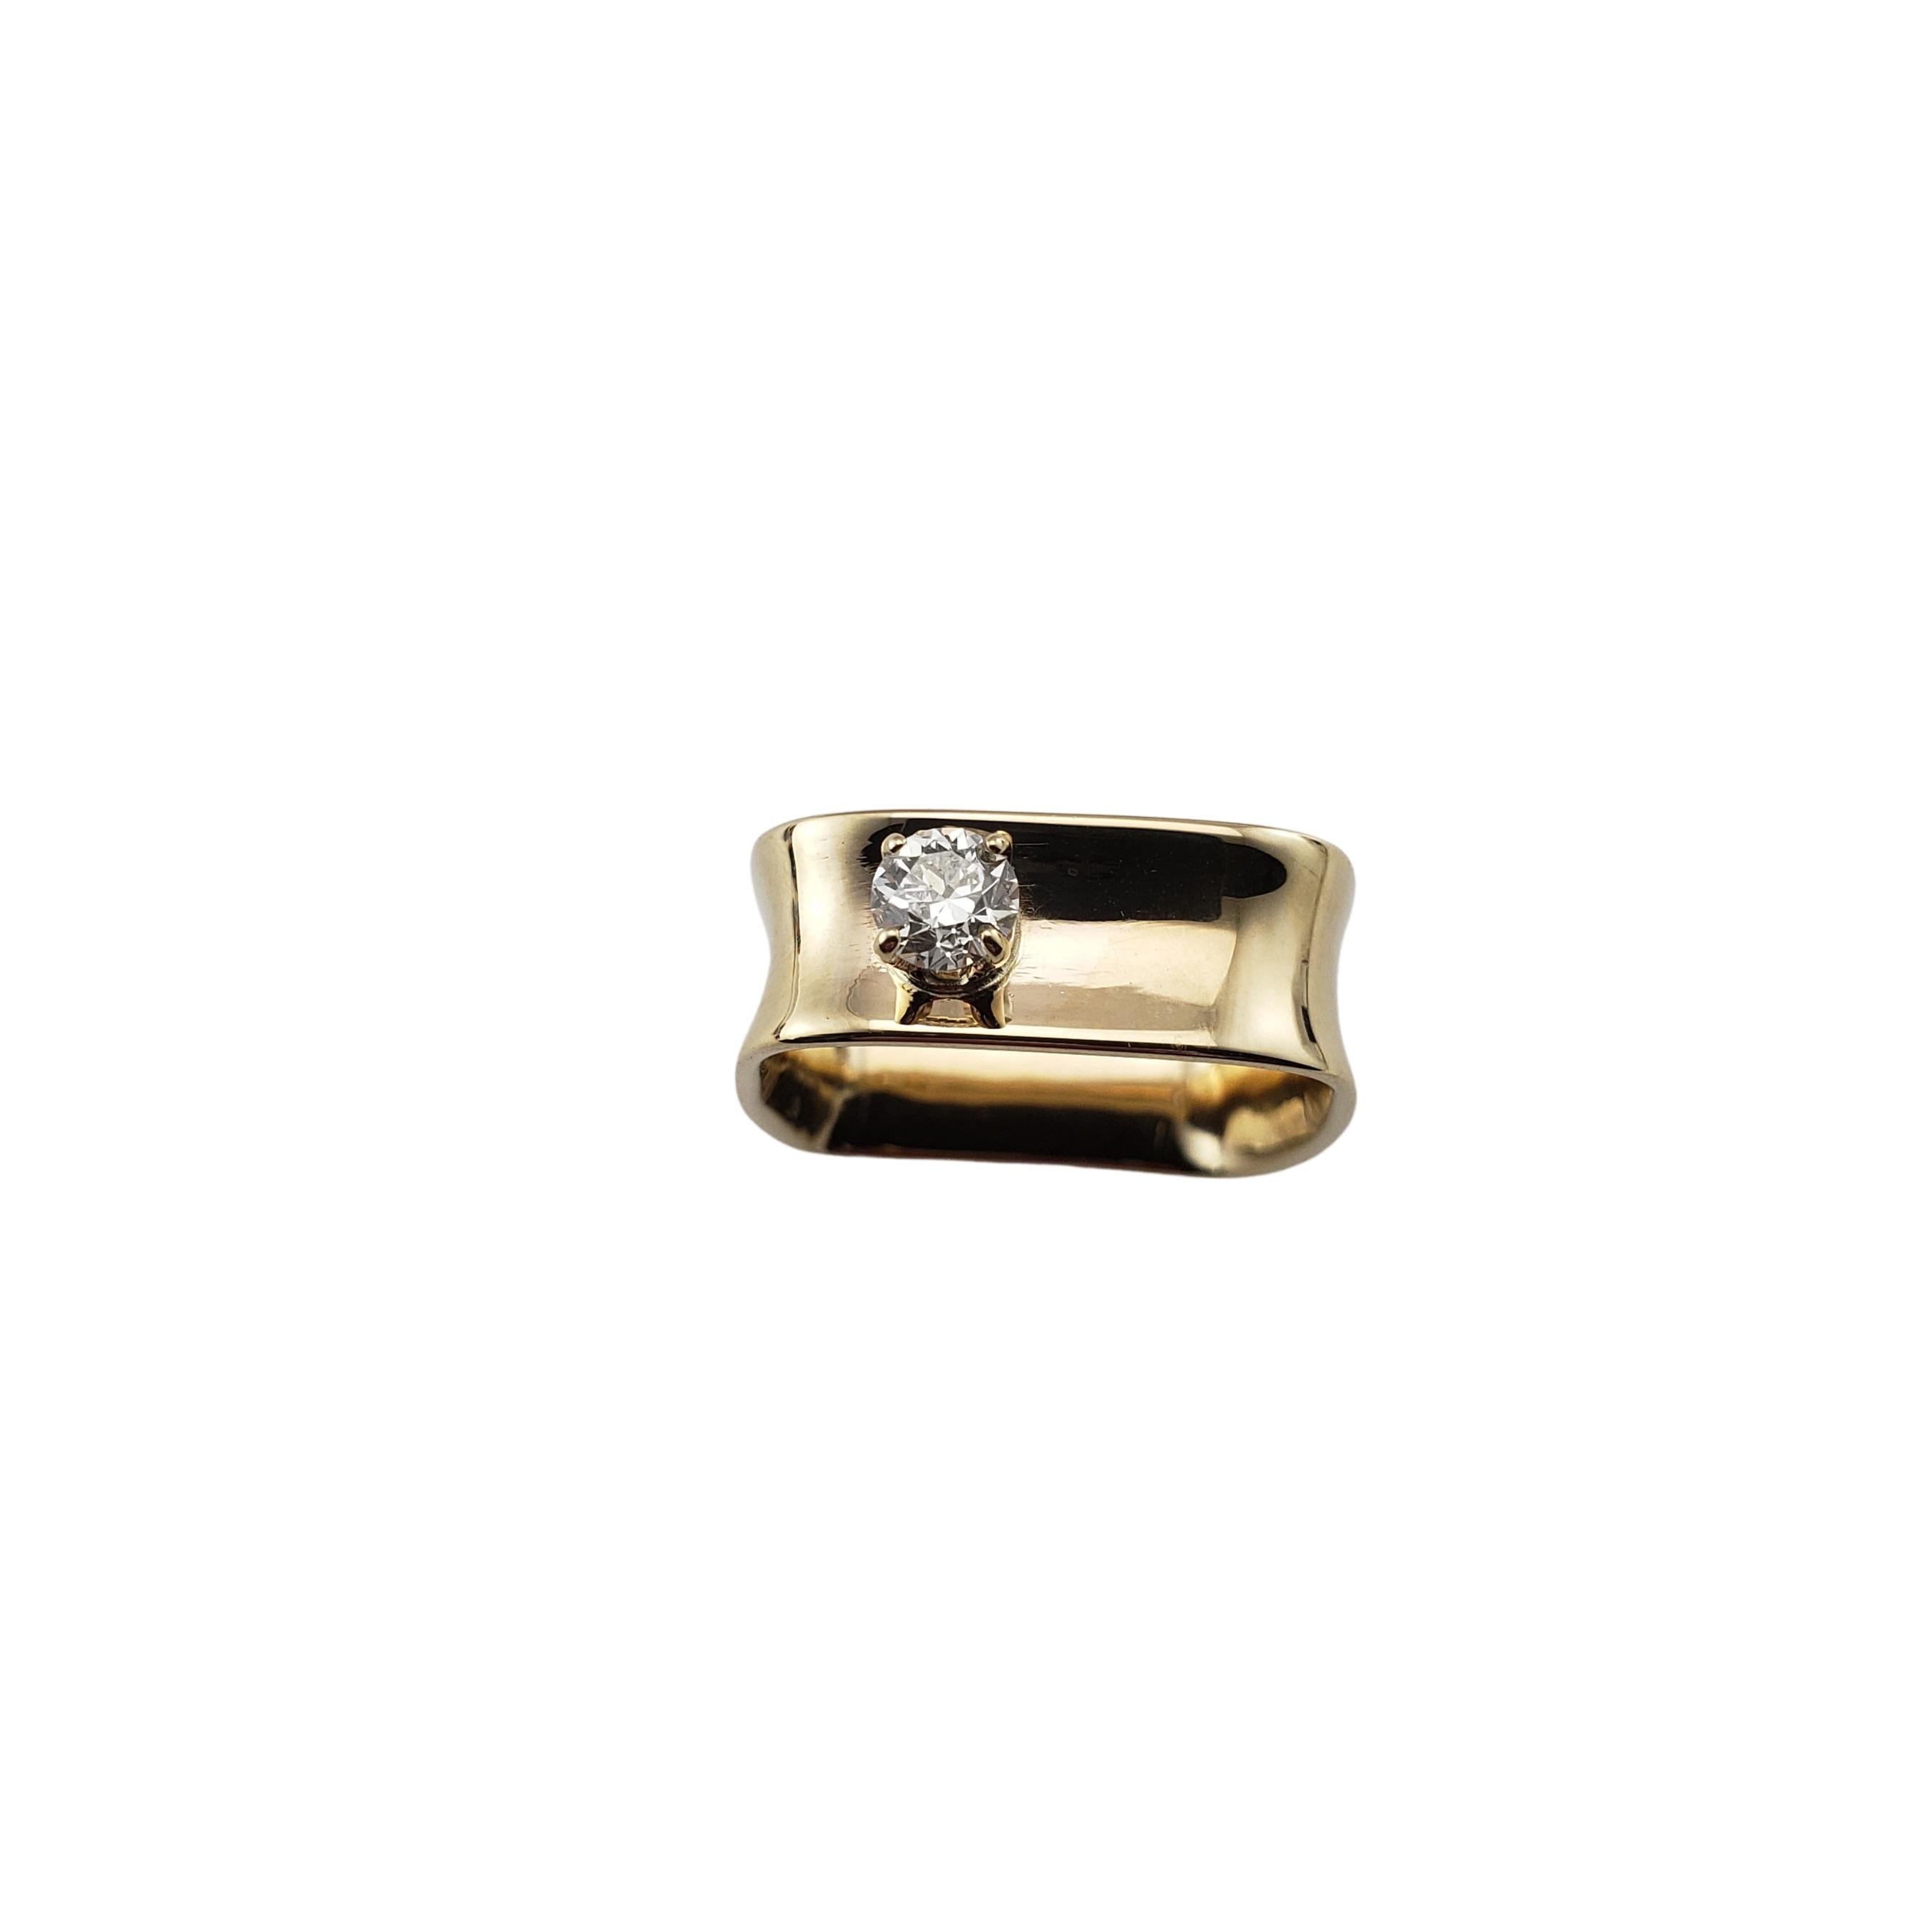 14 Karat Yellow Gold and Diamond Square Ring Size 8-

This lovely 14K yellow gold ring features one round brilliant cut diamond set in a unique square design.  Width:  7 mm

Approximate total diamond weight:  .30 ct.

Diamond color: H

Diamond